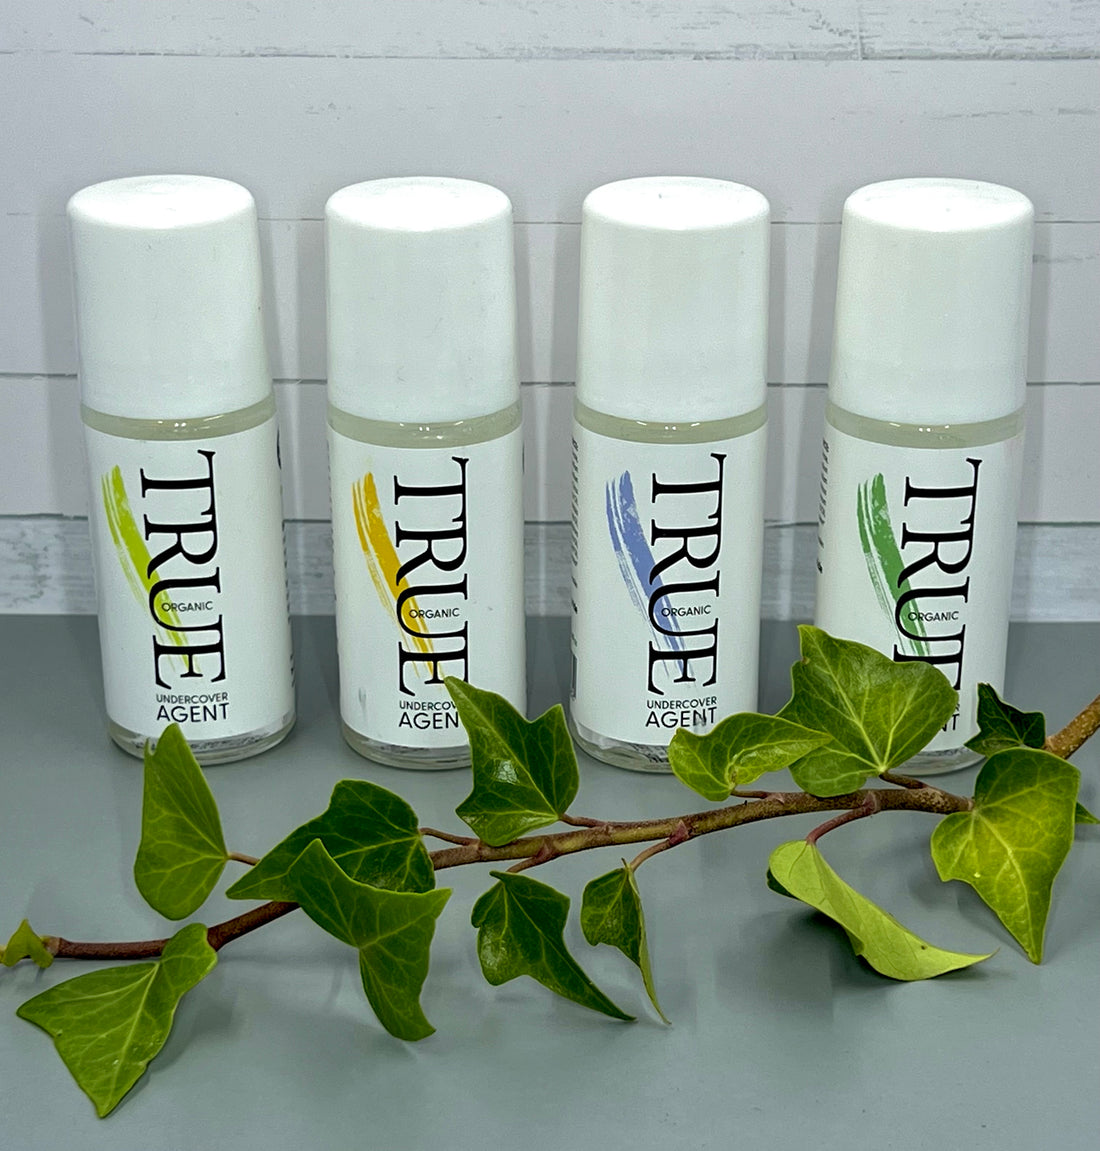 Undercover agent natural deodorant by True organic of Sweden 